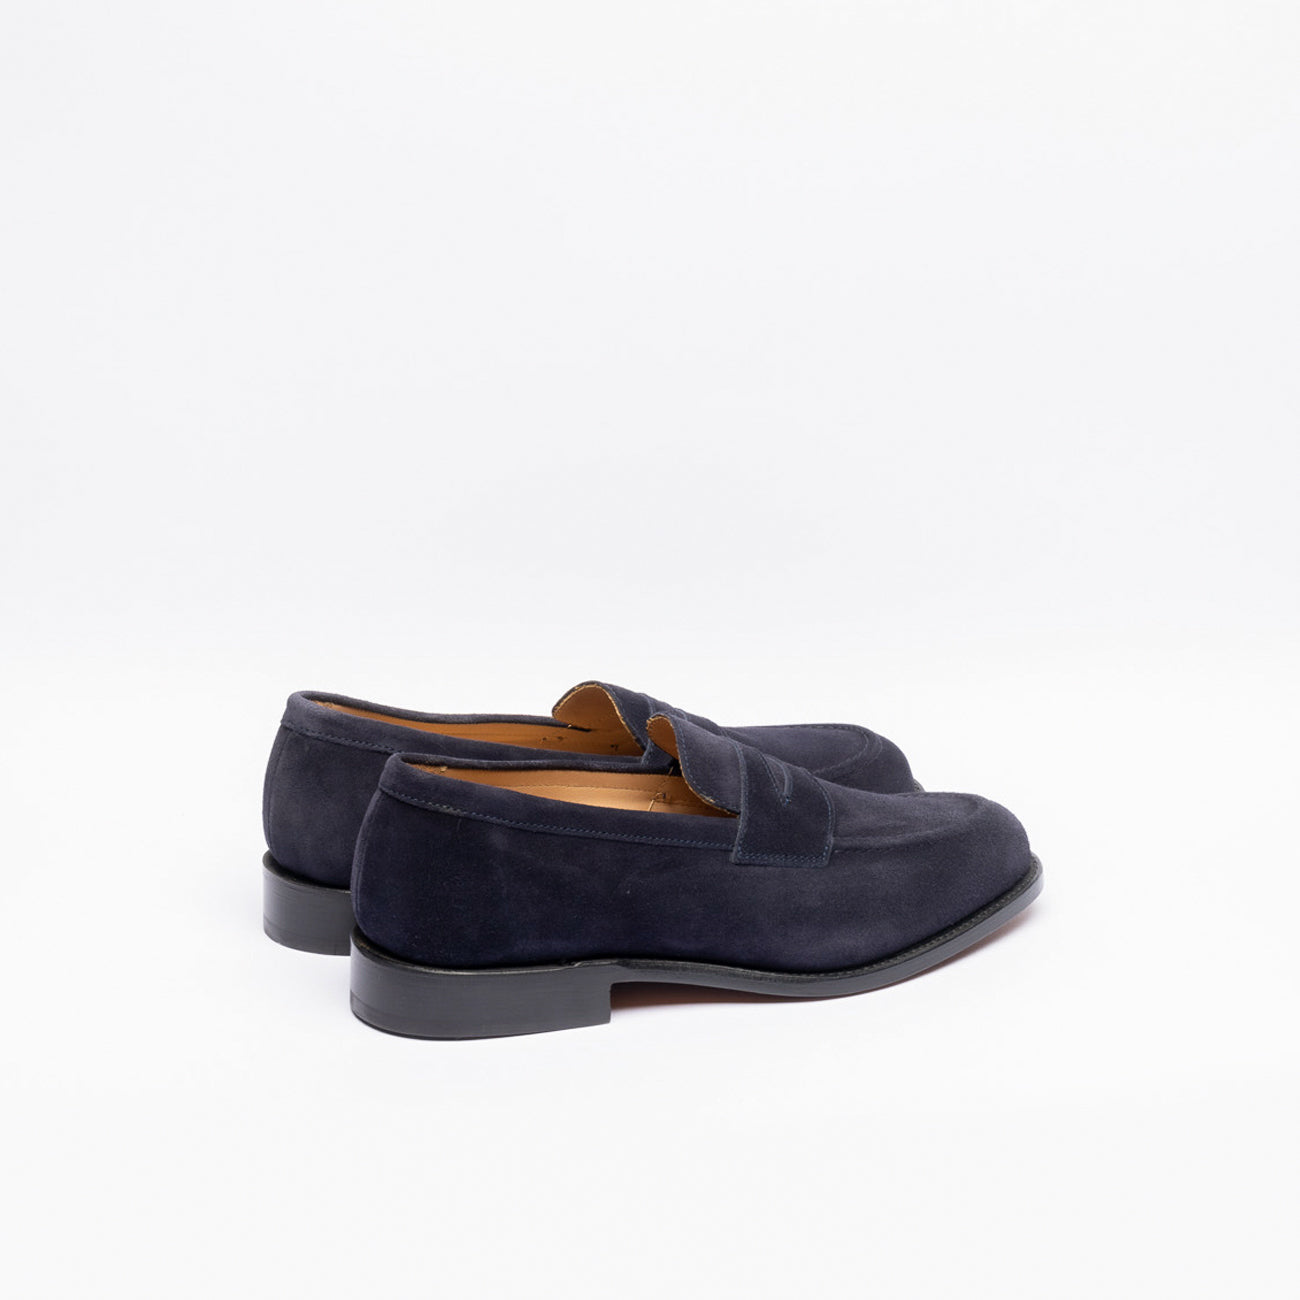 Tricker’s Havard penny loafer moccasin in blue suede